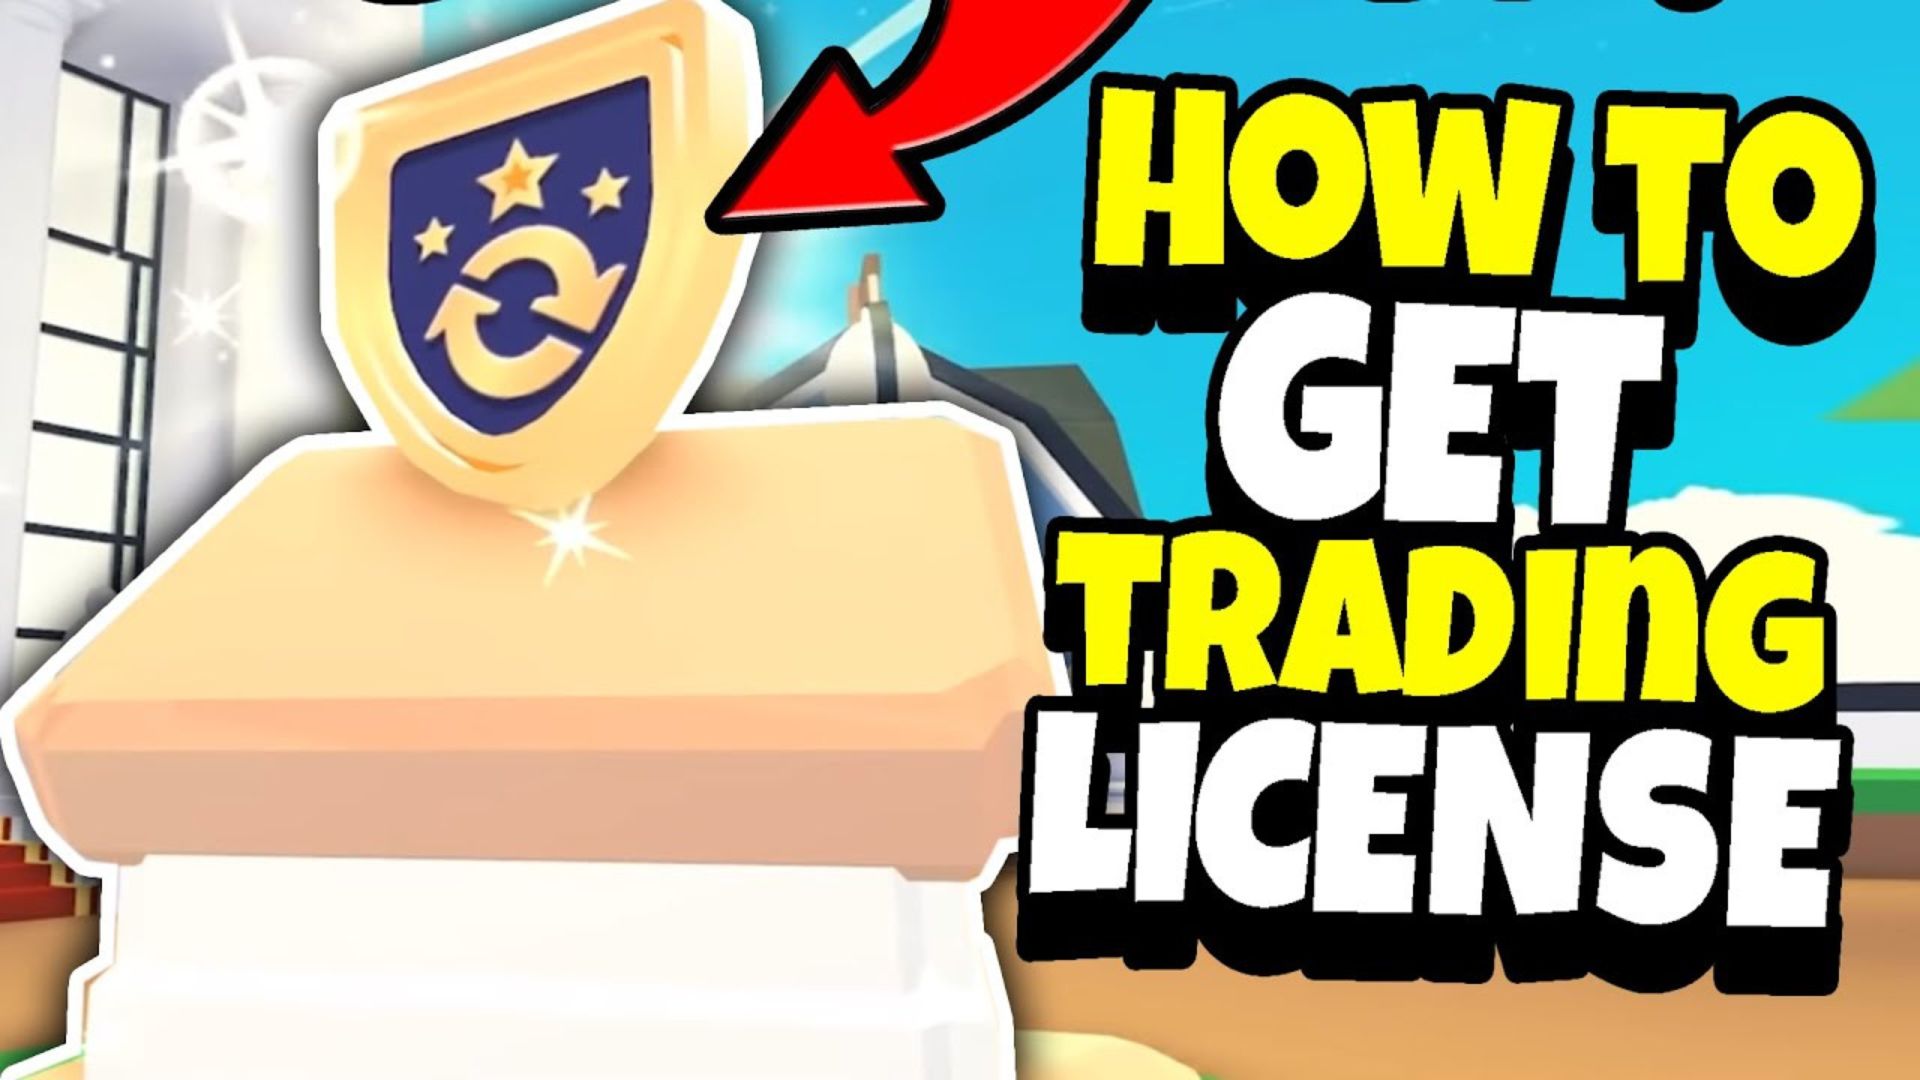 How To Get a Trading License in Adopt Me